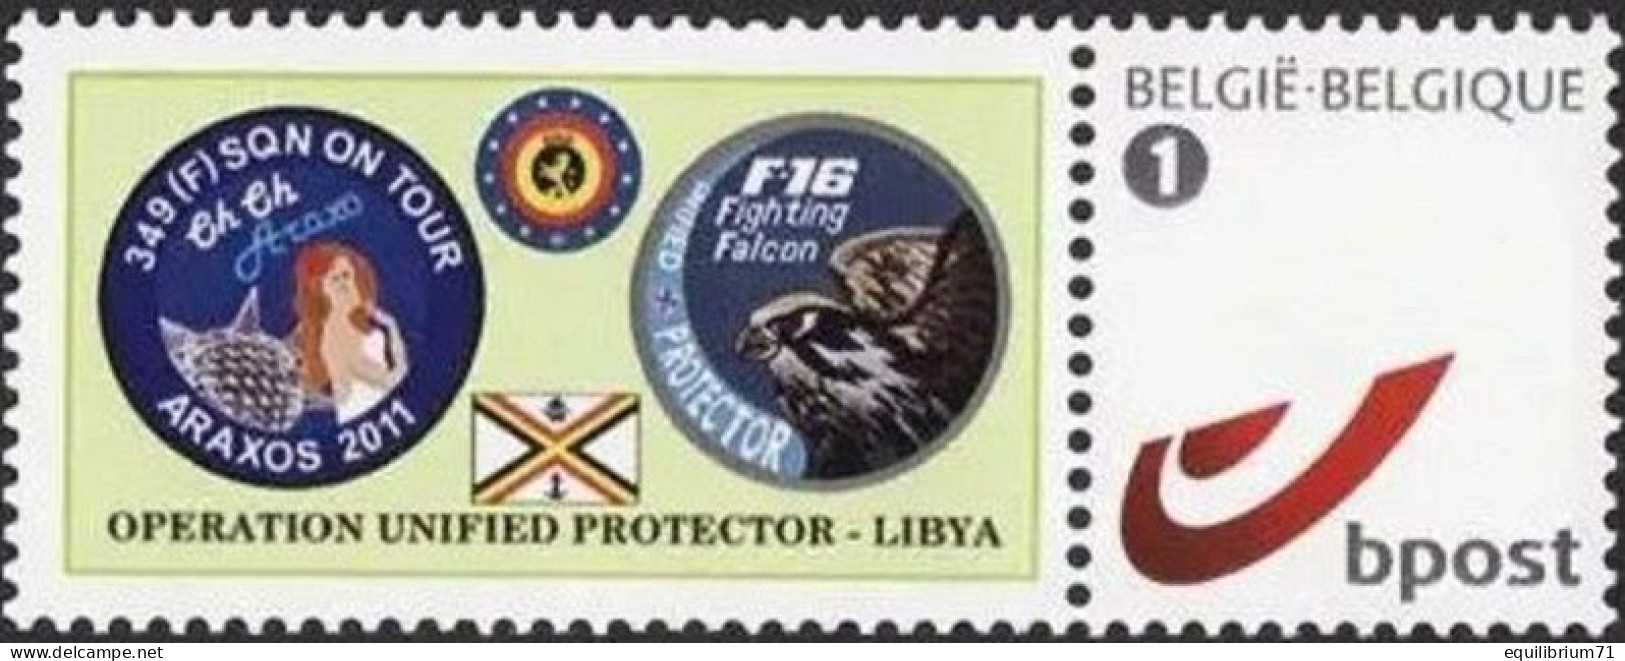 DUOSTAMP** / MYSTAMP** - Operation Unified Protector - NATO And Libya - Militares